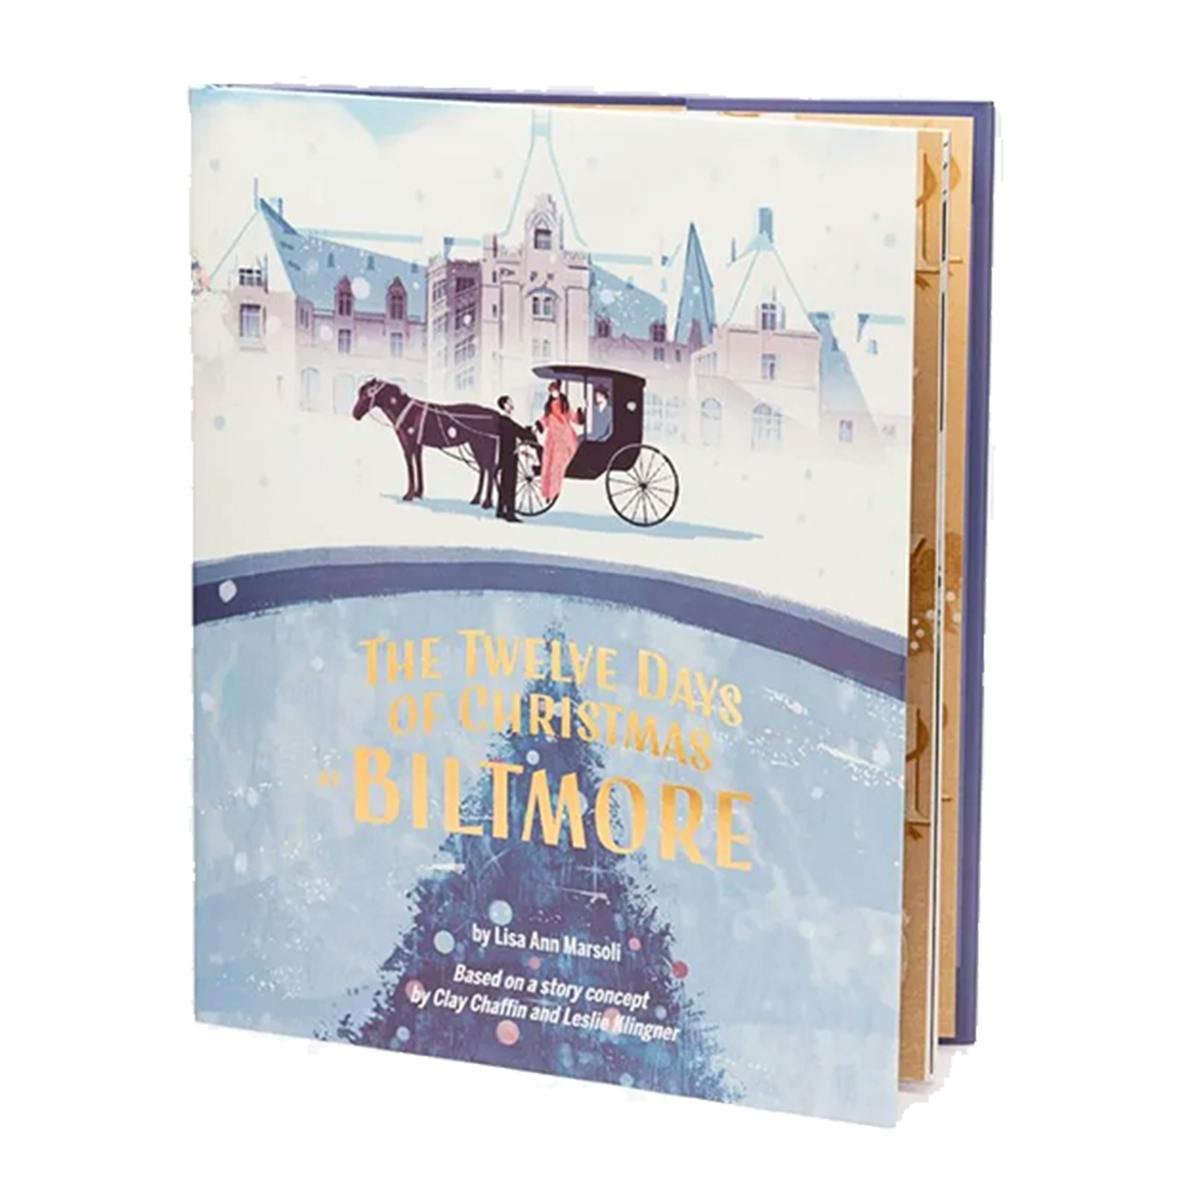 Cover of The Twelve Days of Christmas at Biltmore Storybook.